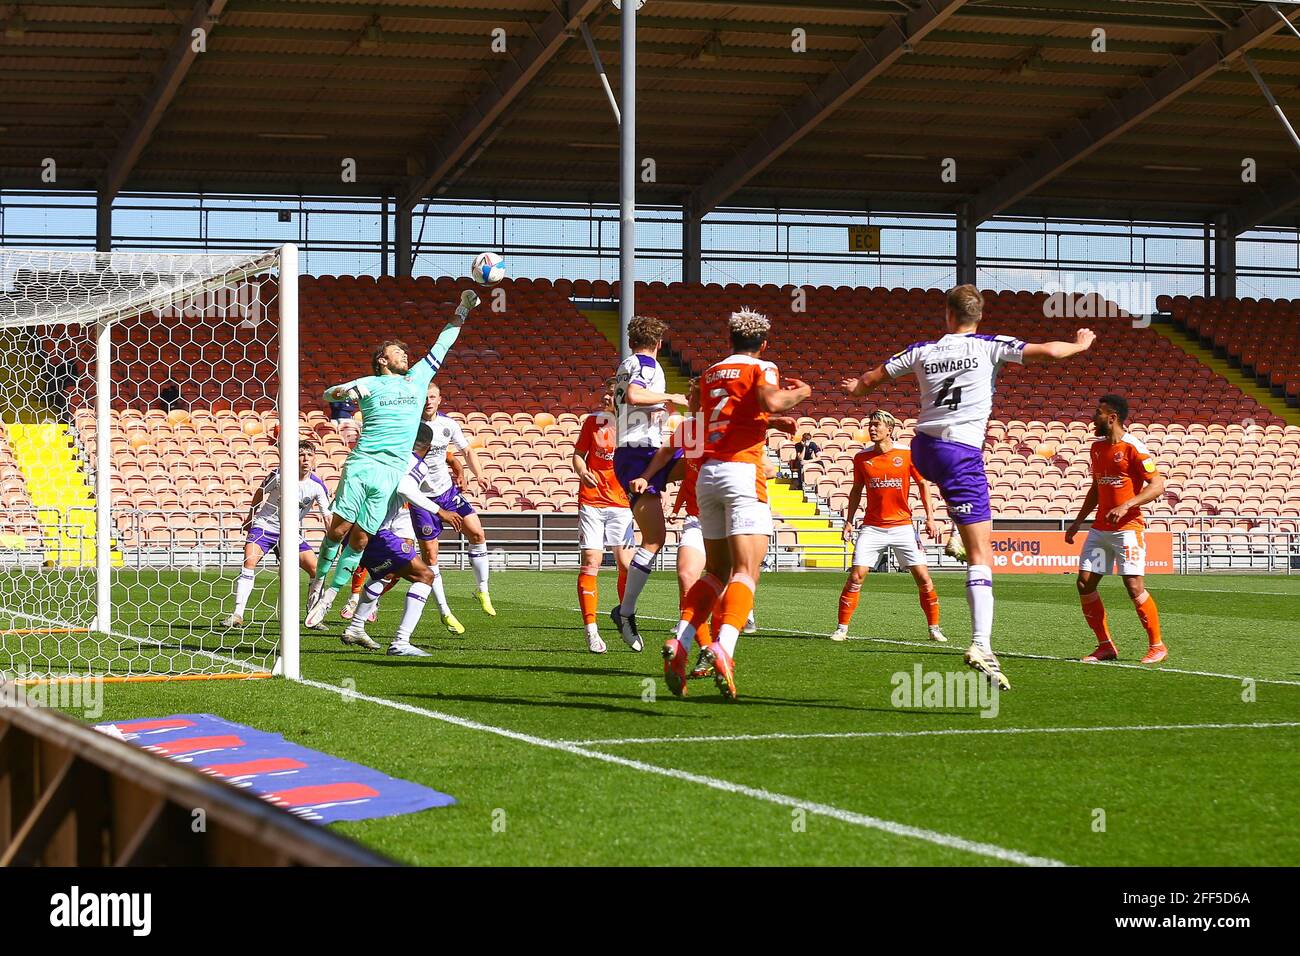 Bloomfield Road, Blackpool, UK. 24th Apr, 2021. Chris Maxwell Goalkeeper of Blackpool punches clear from a corner during the game Blackpool v Shrewsbury Sky Bet League One 2020/21 Bloomfield Road, Blackpool, England - 24th April 2021 Credit: Arthur Haigh/Alamy Live News Stock Photo